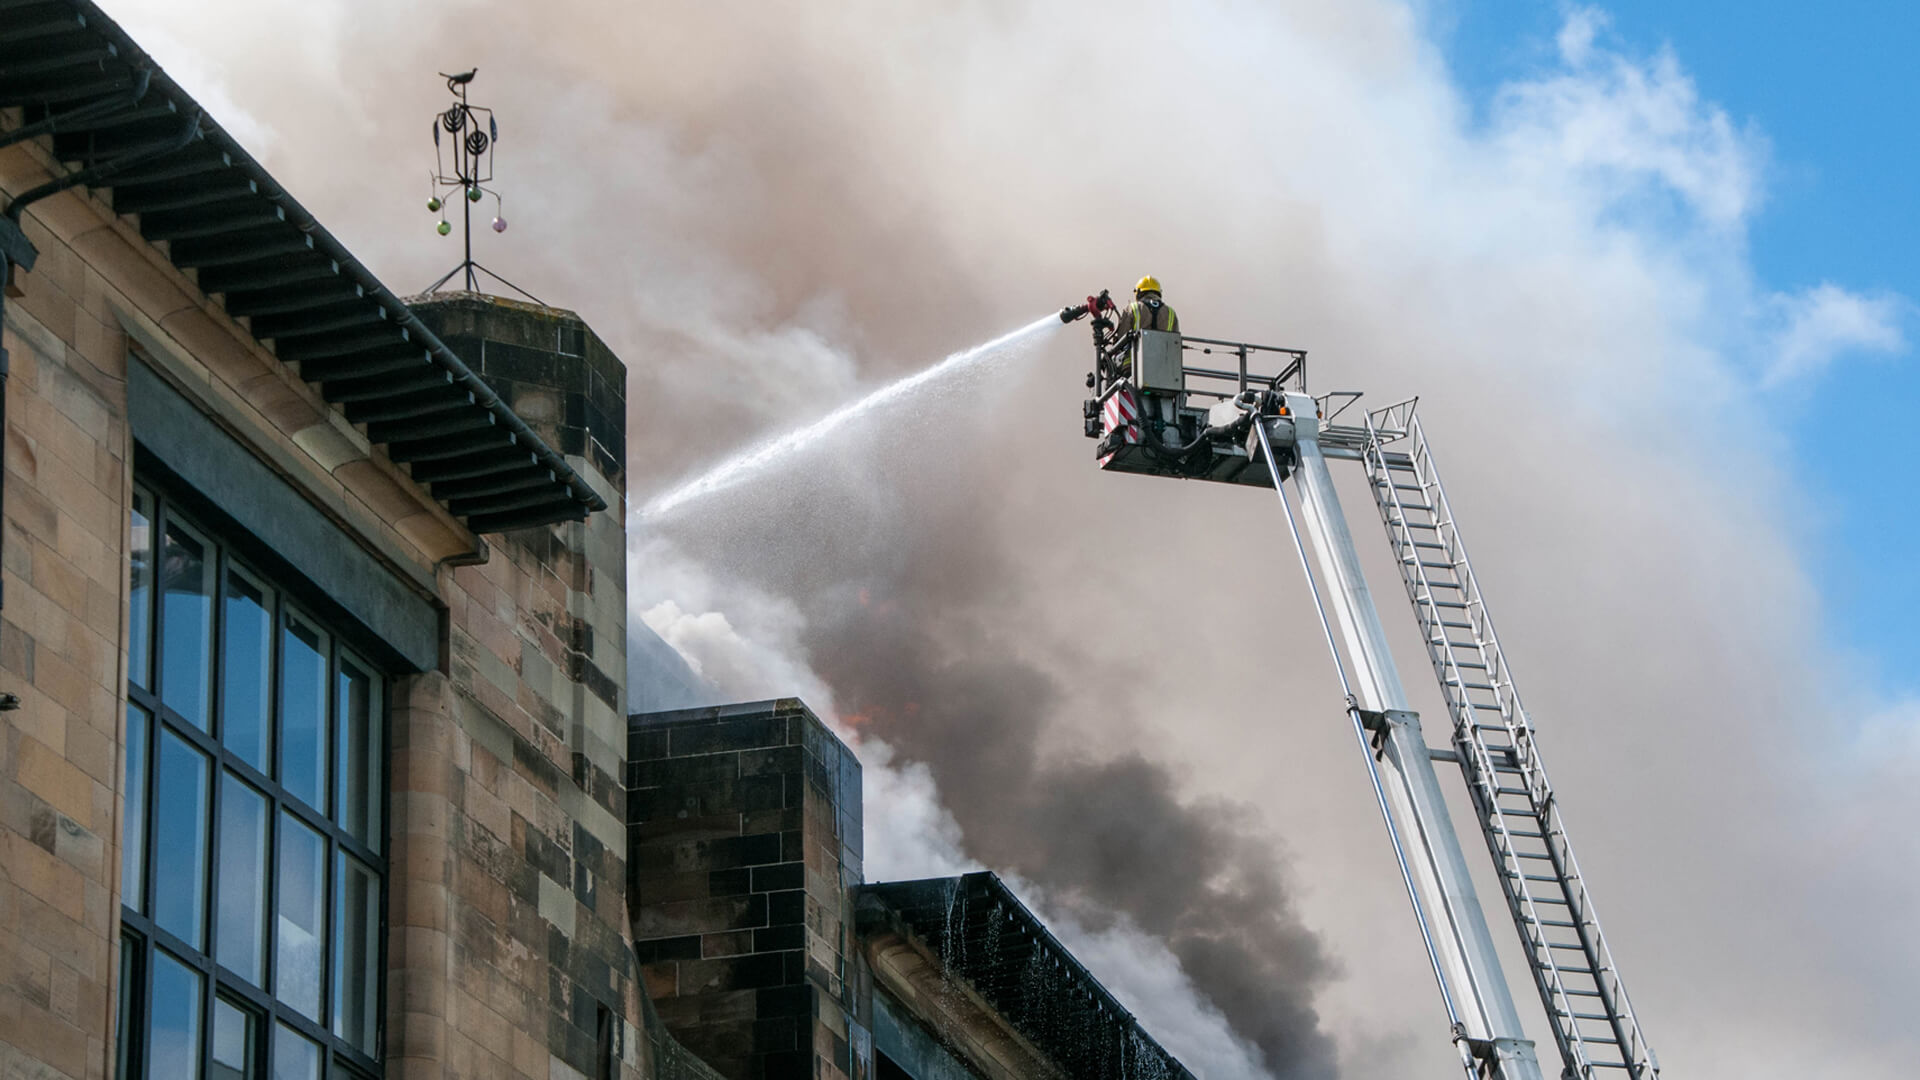 firefighters battle a building blaze from above